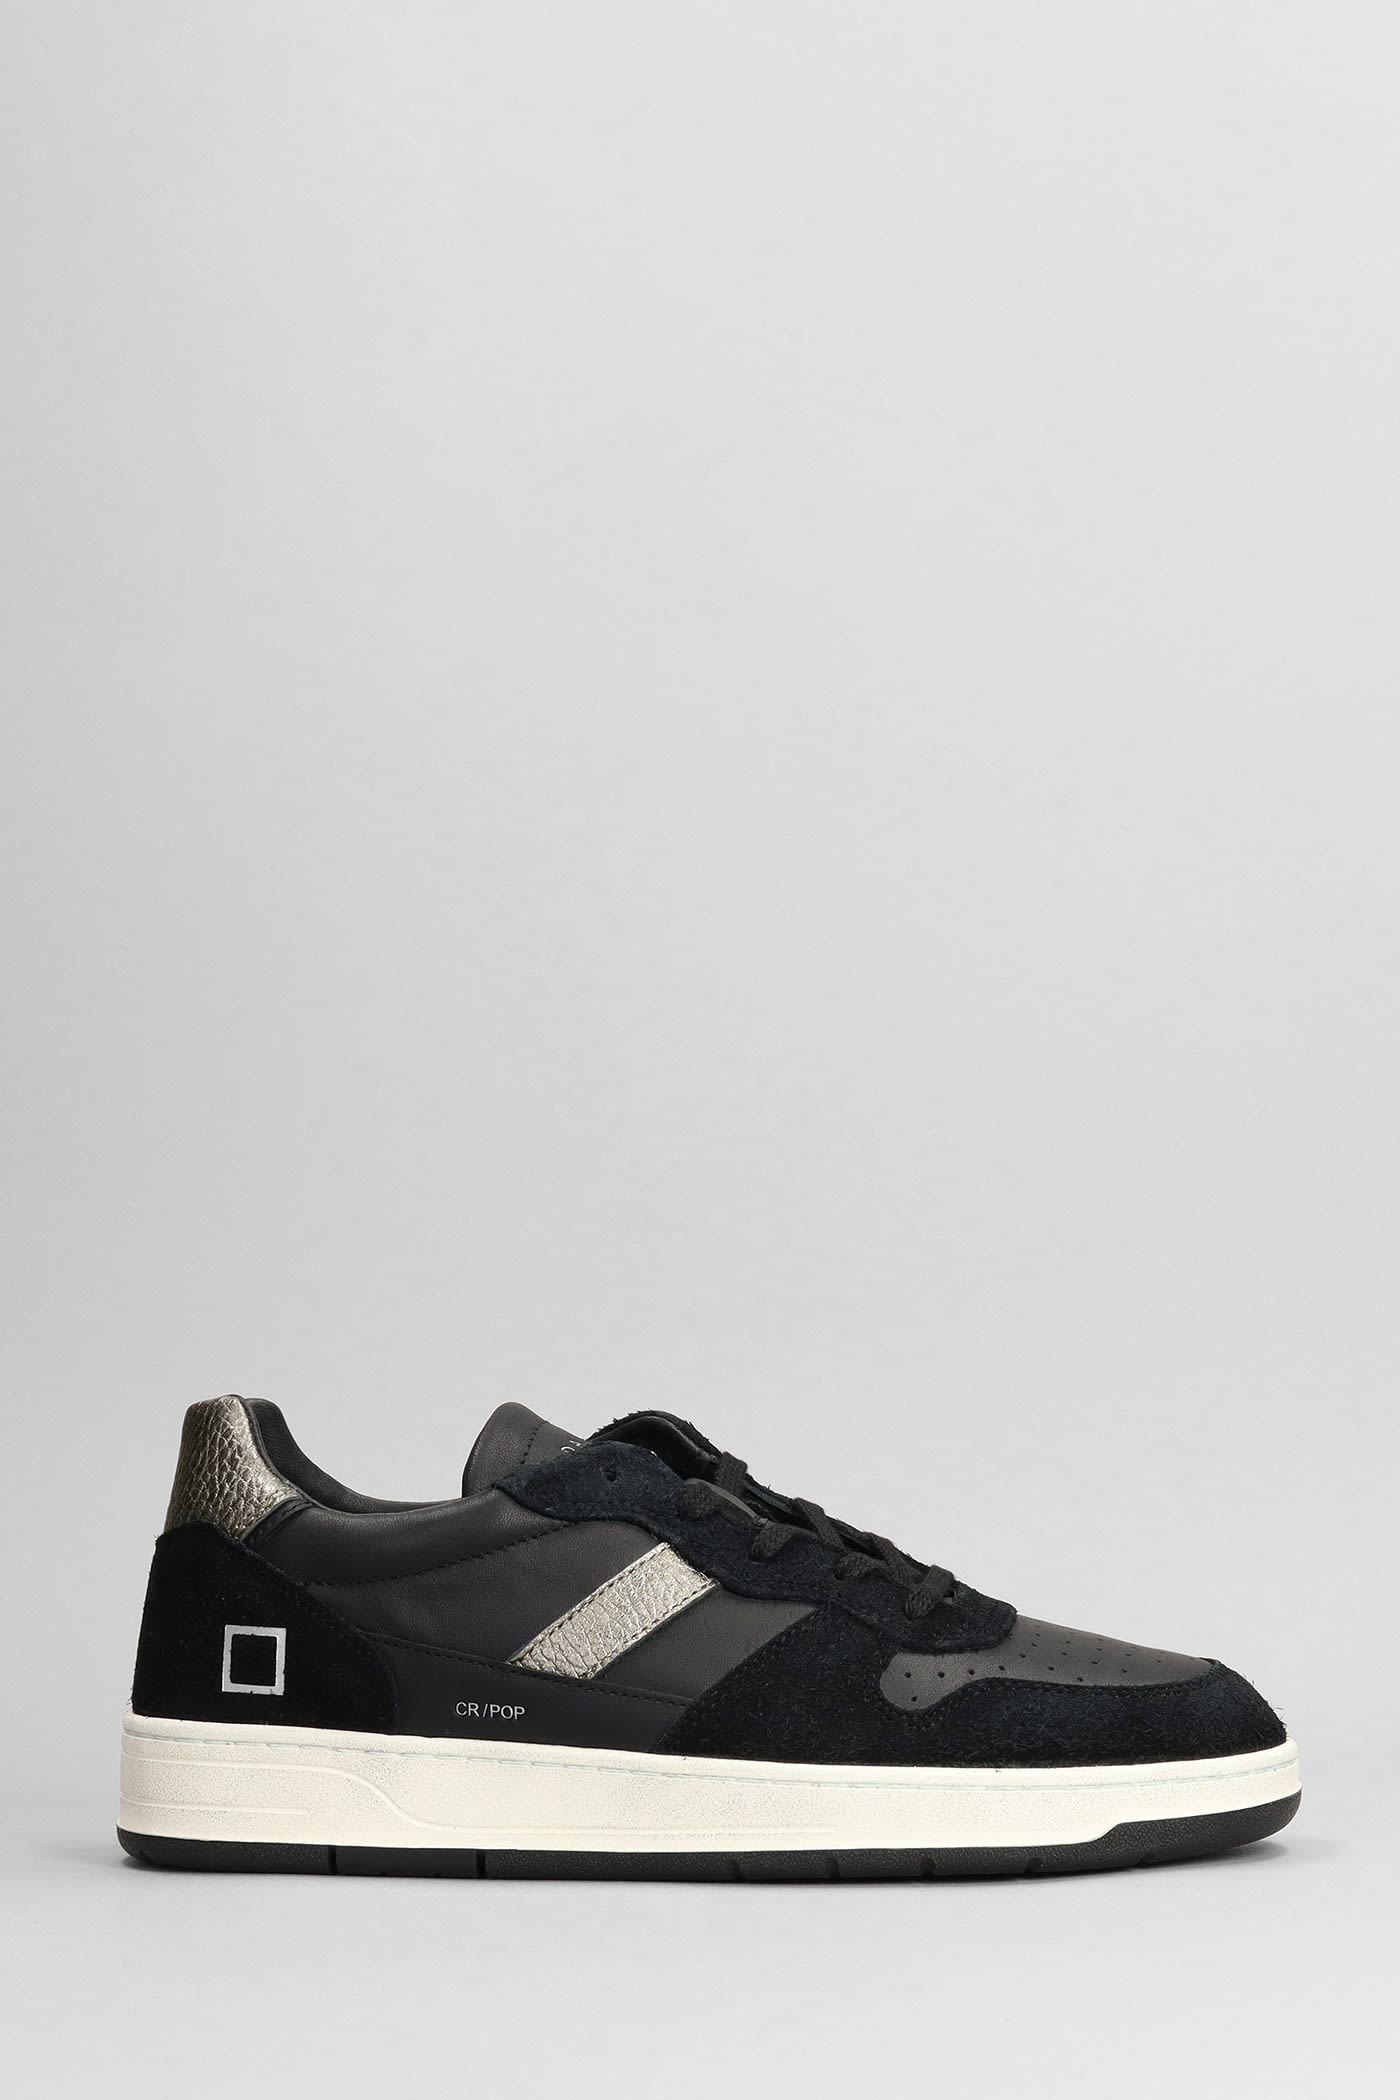 Shop Date Court 2.0 Sneakers In Black Suede And Leather